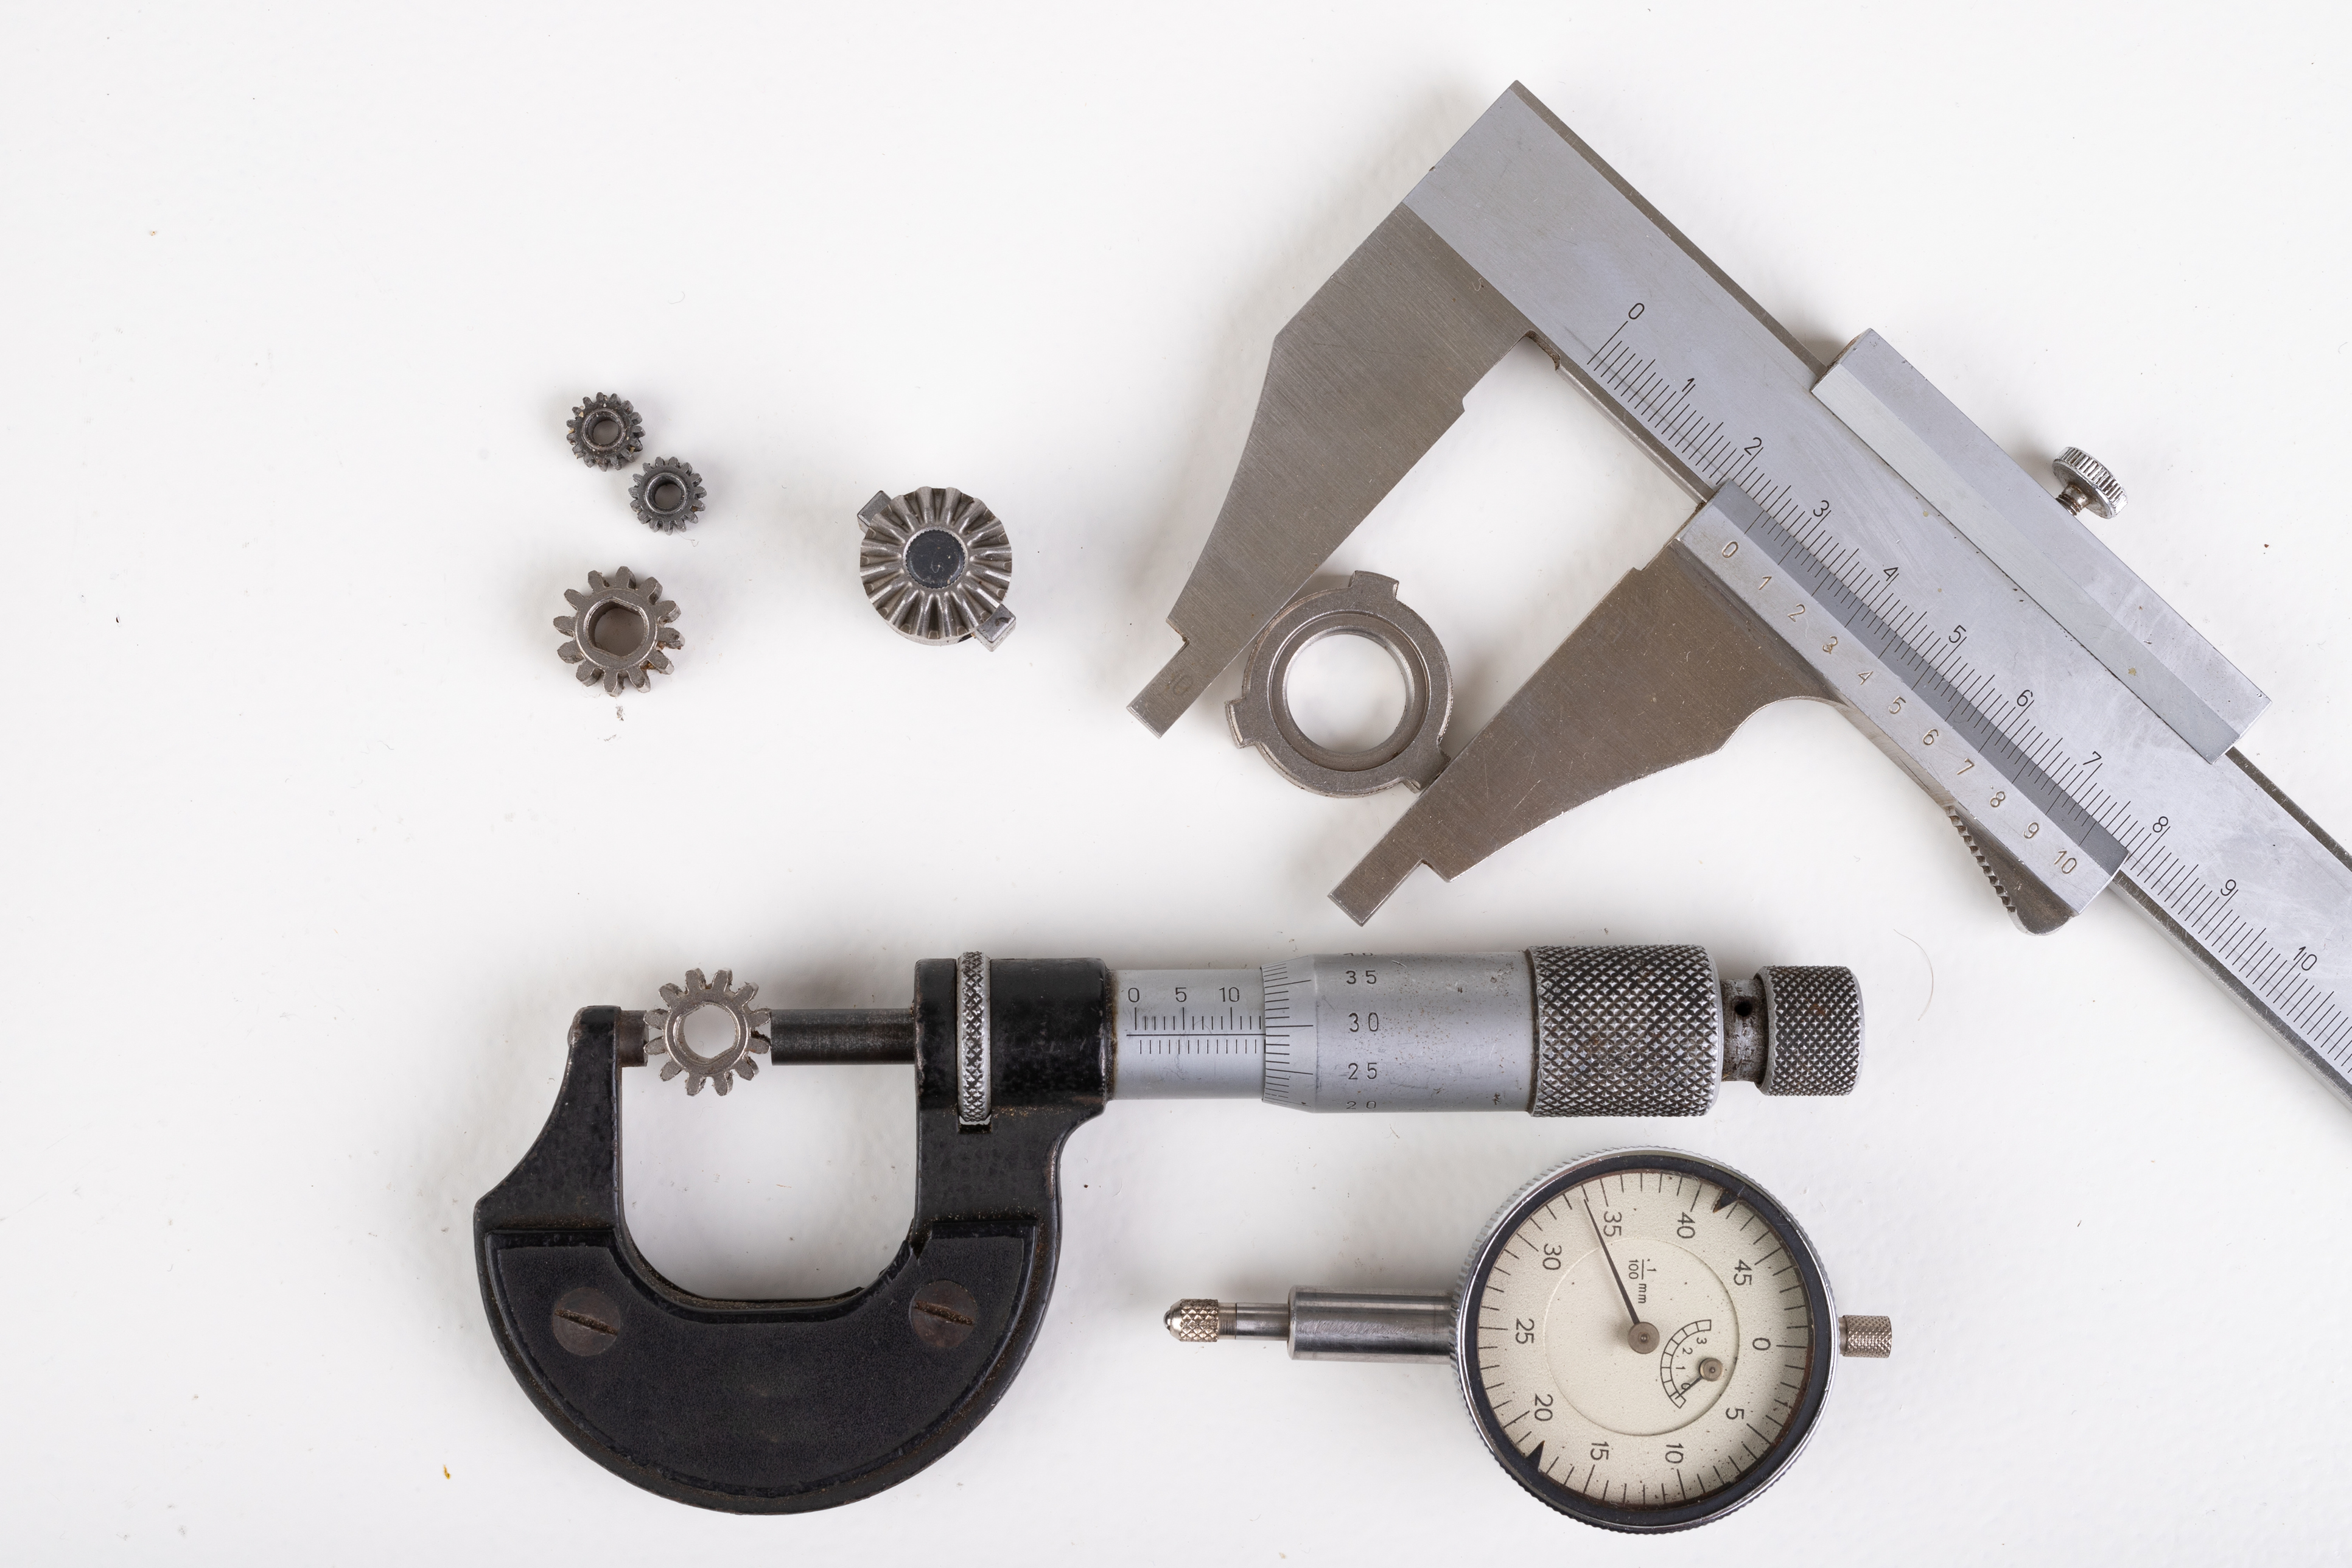 Micrometer, caliper and gear wheels for measurements. Workshop accessories. Light background.